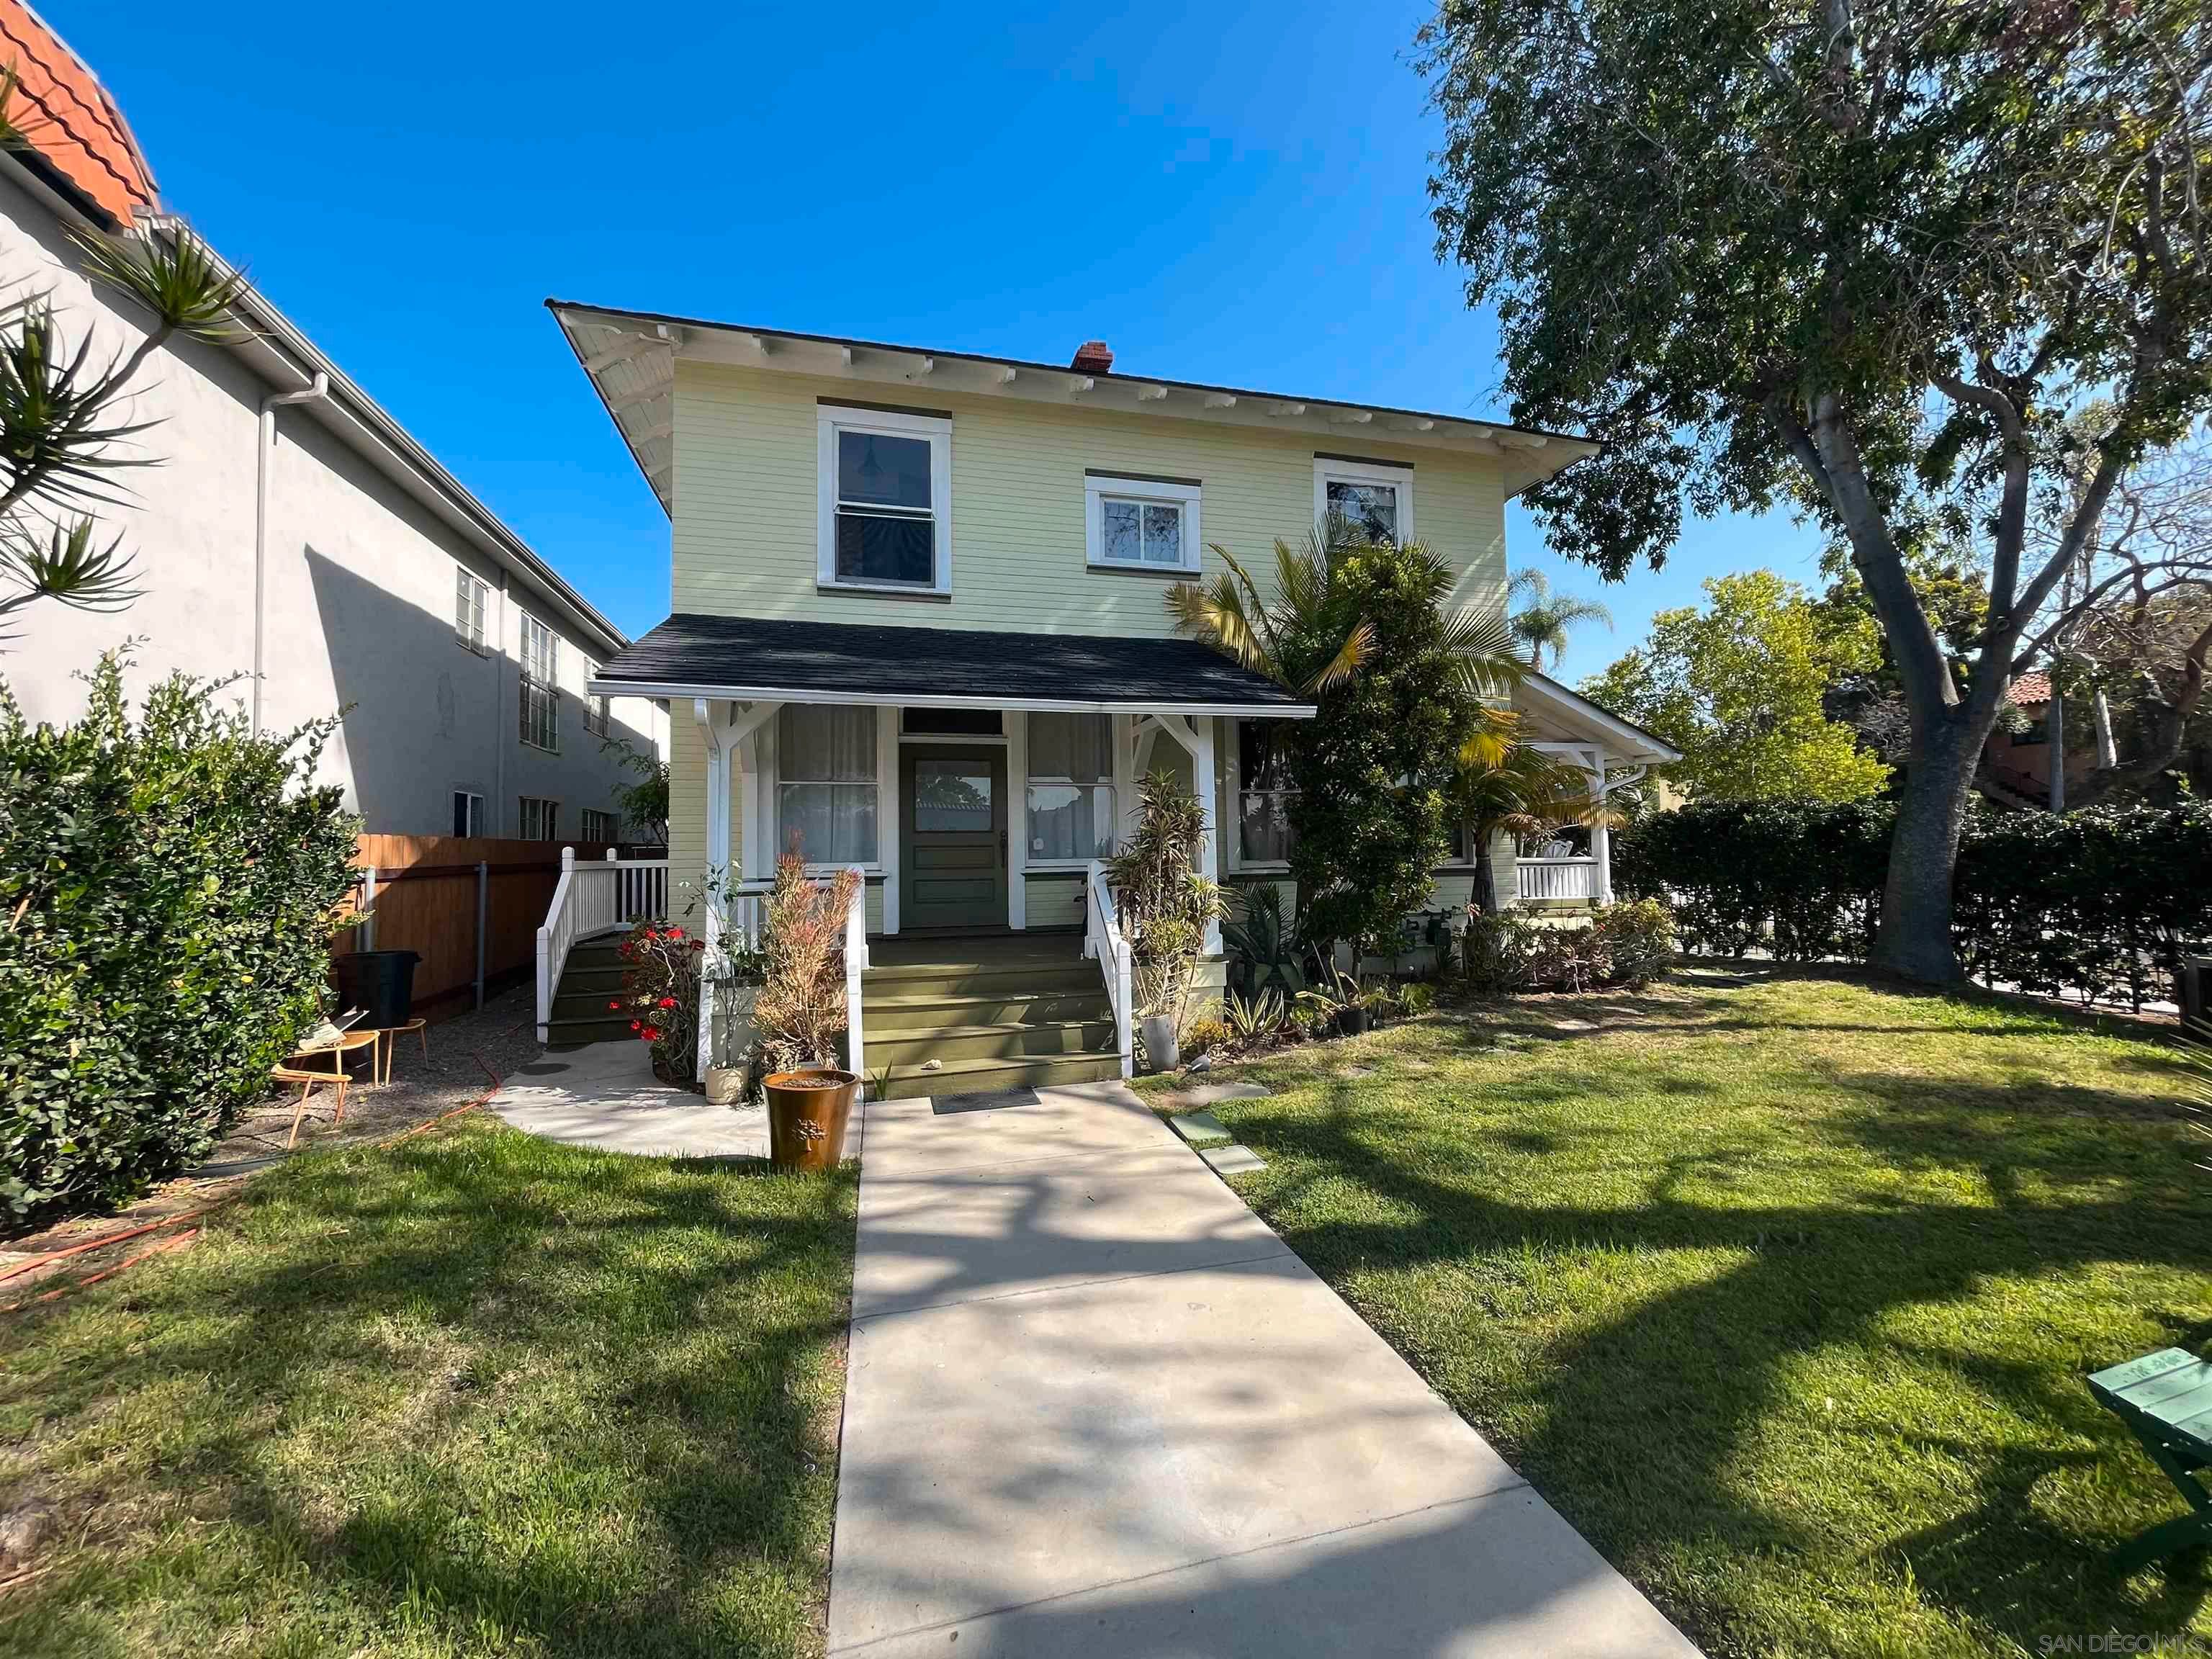 I have sold a property at 2492 B St in San Diego
